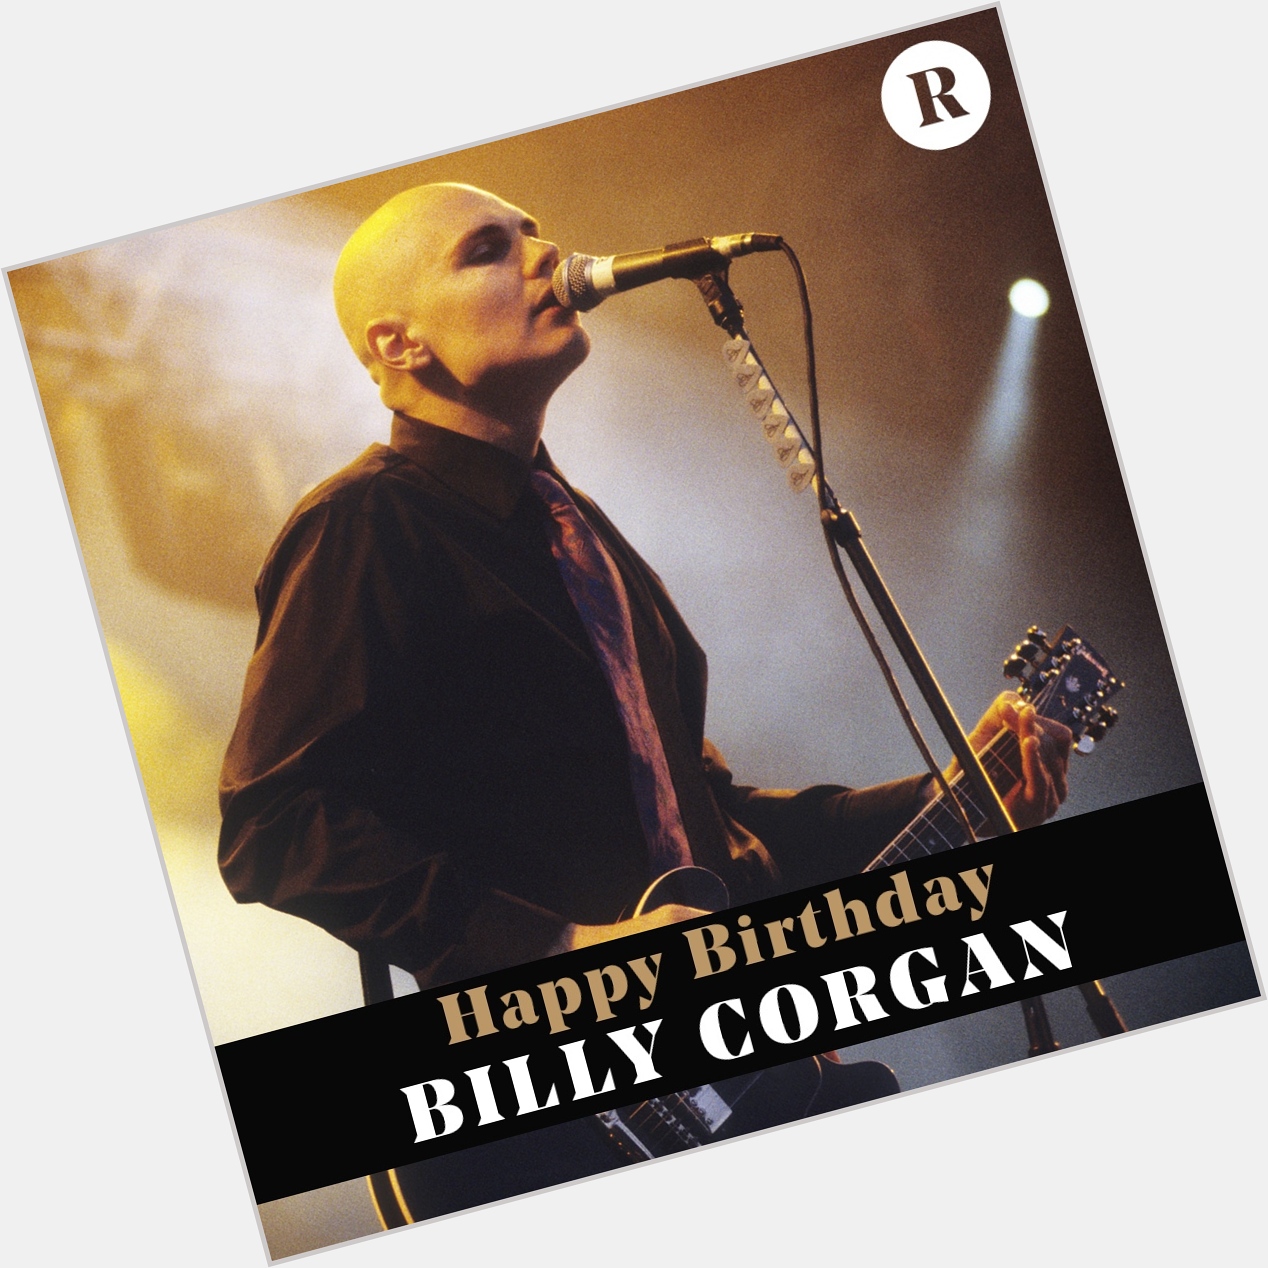  Happy birthday, Corgan! What\s your favorite song? 